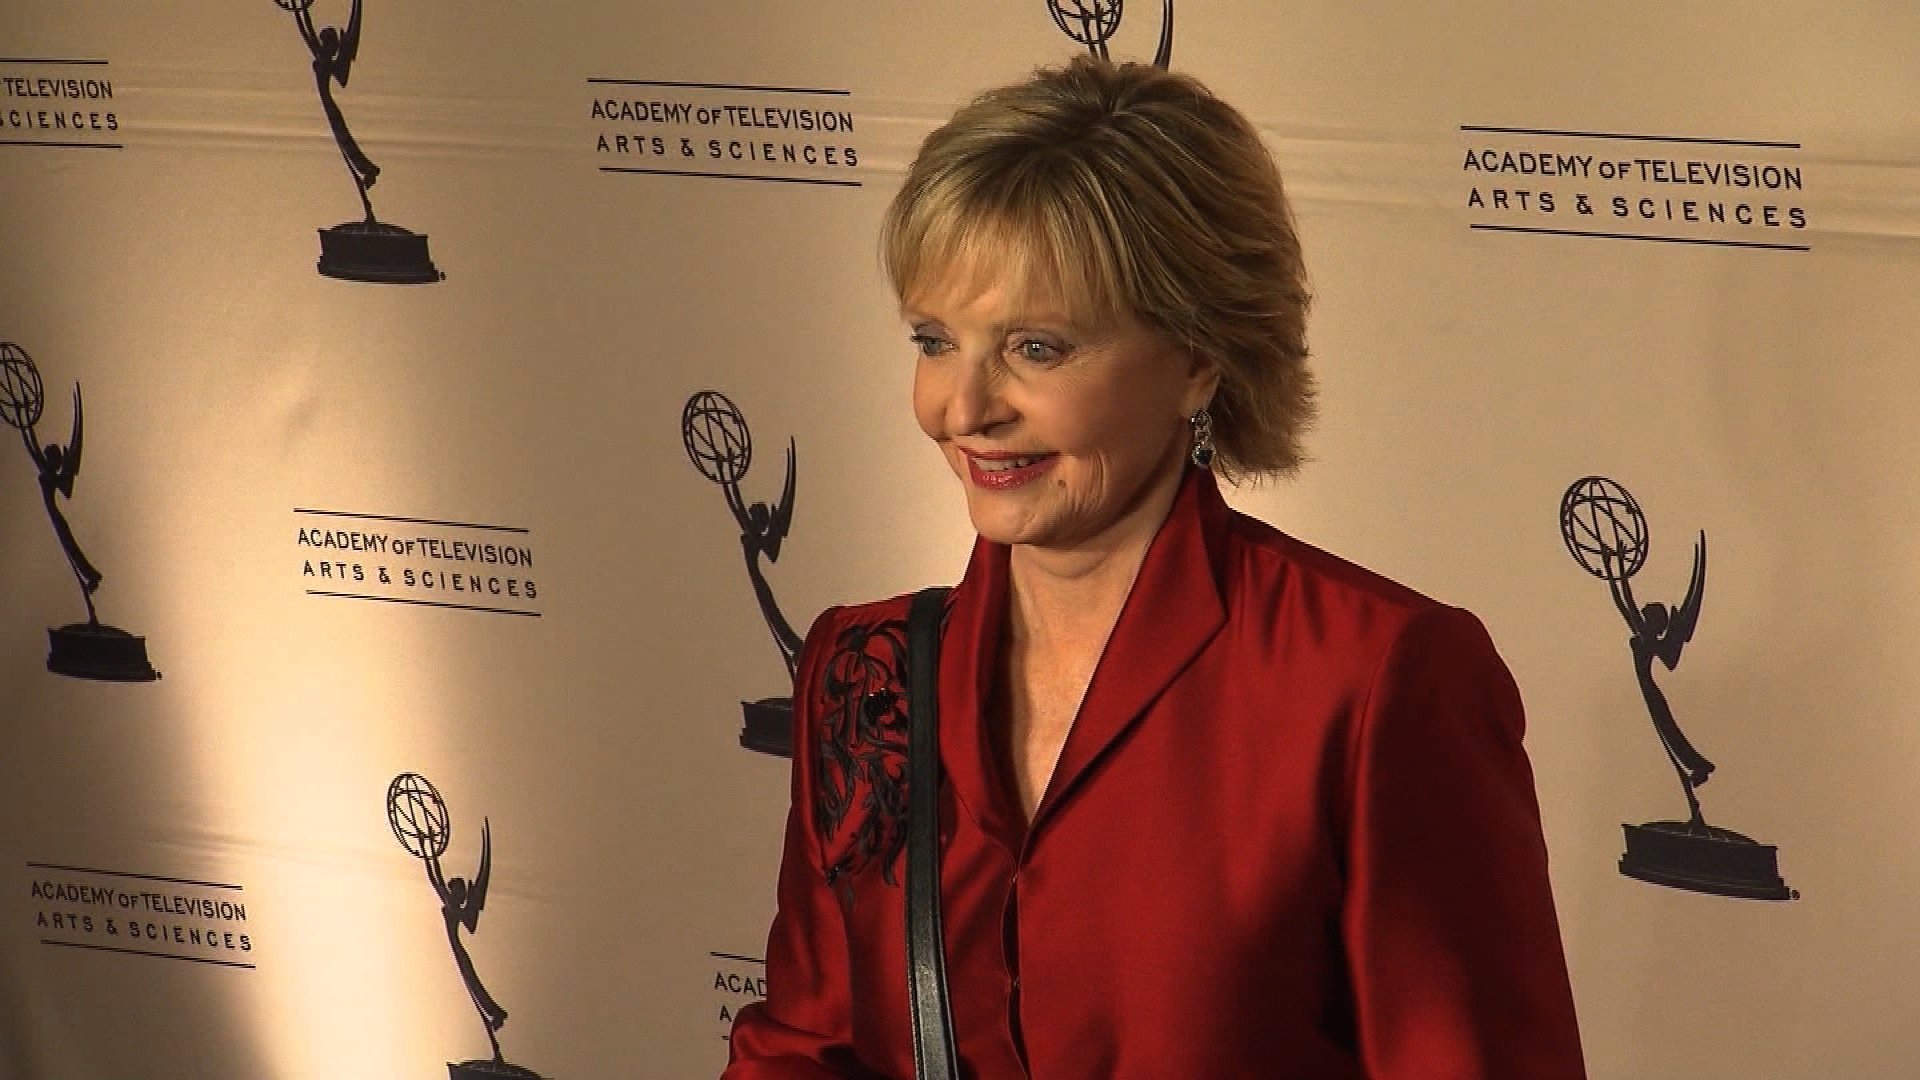 She was one of America's moms, a television icon that endured through generations. Florence Henderson, who played Carol Brady on "The Brady Bunch," died Thursday from heart failure at the age of 82.